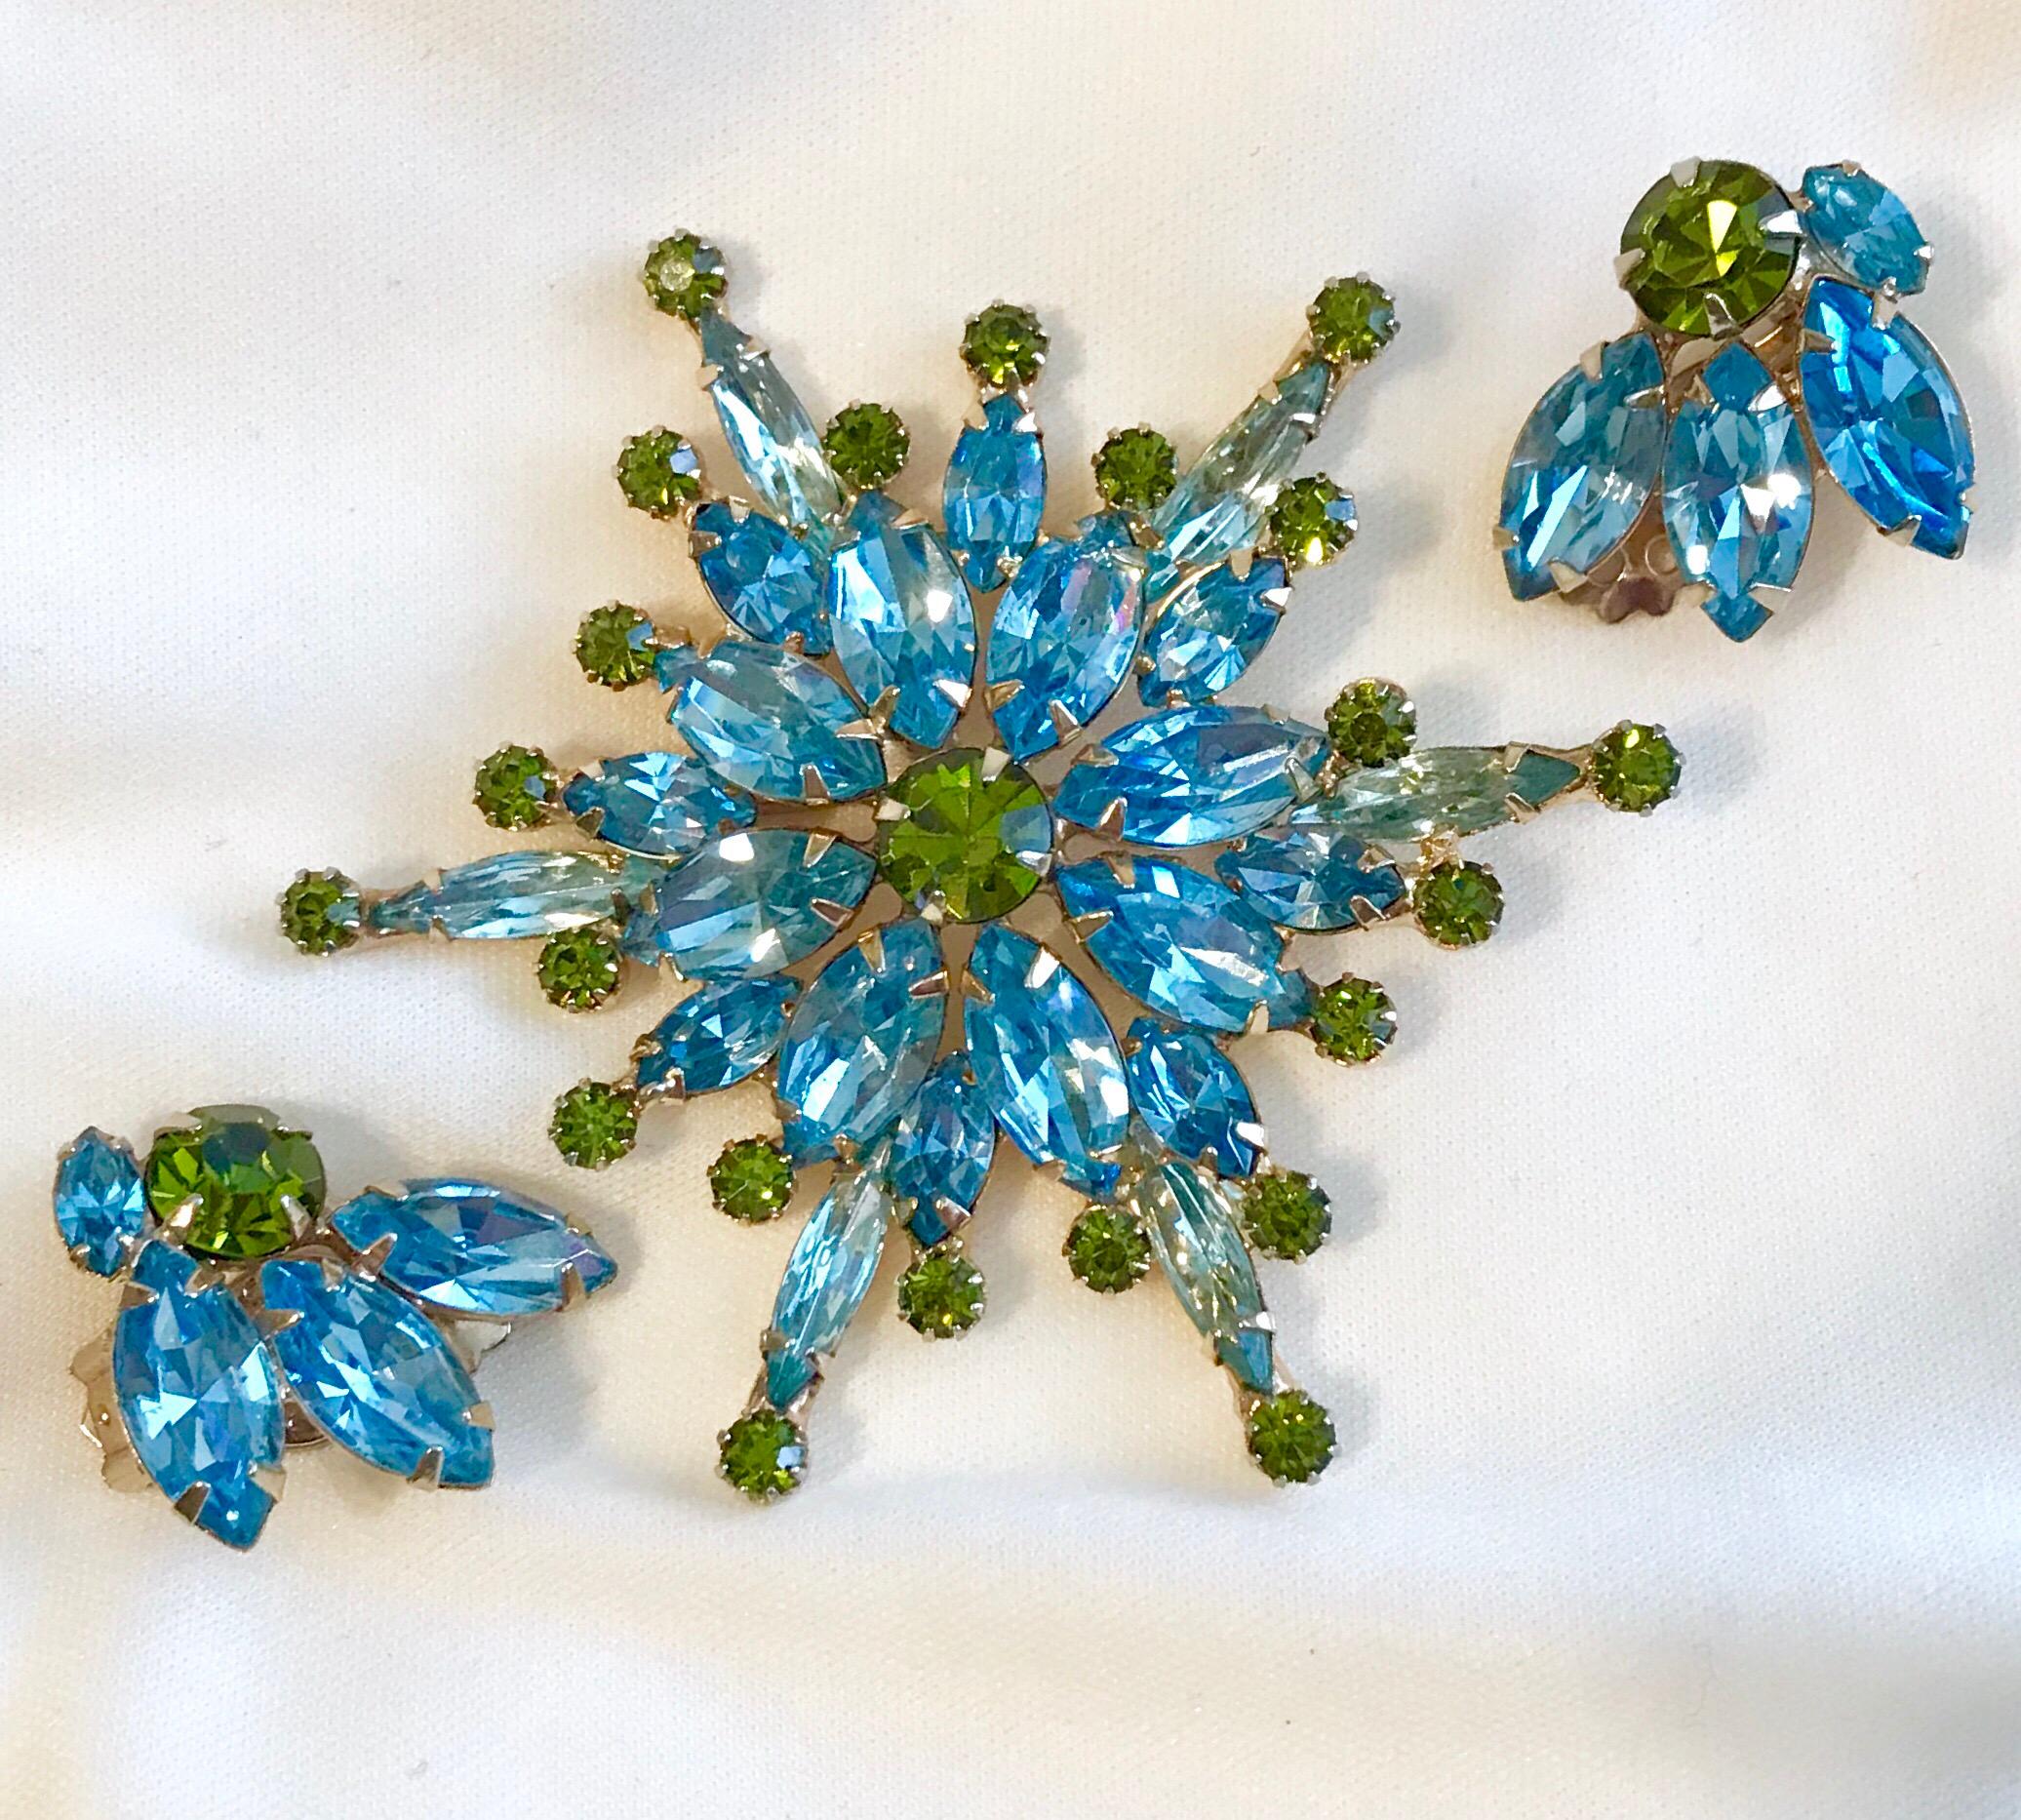 Circa 1960 Hattie Carnegie brooch and earring set.  The brooch, in a starburst design, is prong set with light blue faceted glass marquise and round faceted olivine green stones.  It measures 2.75